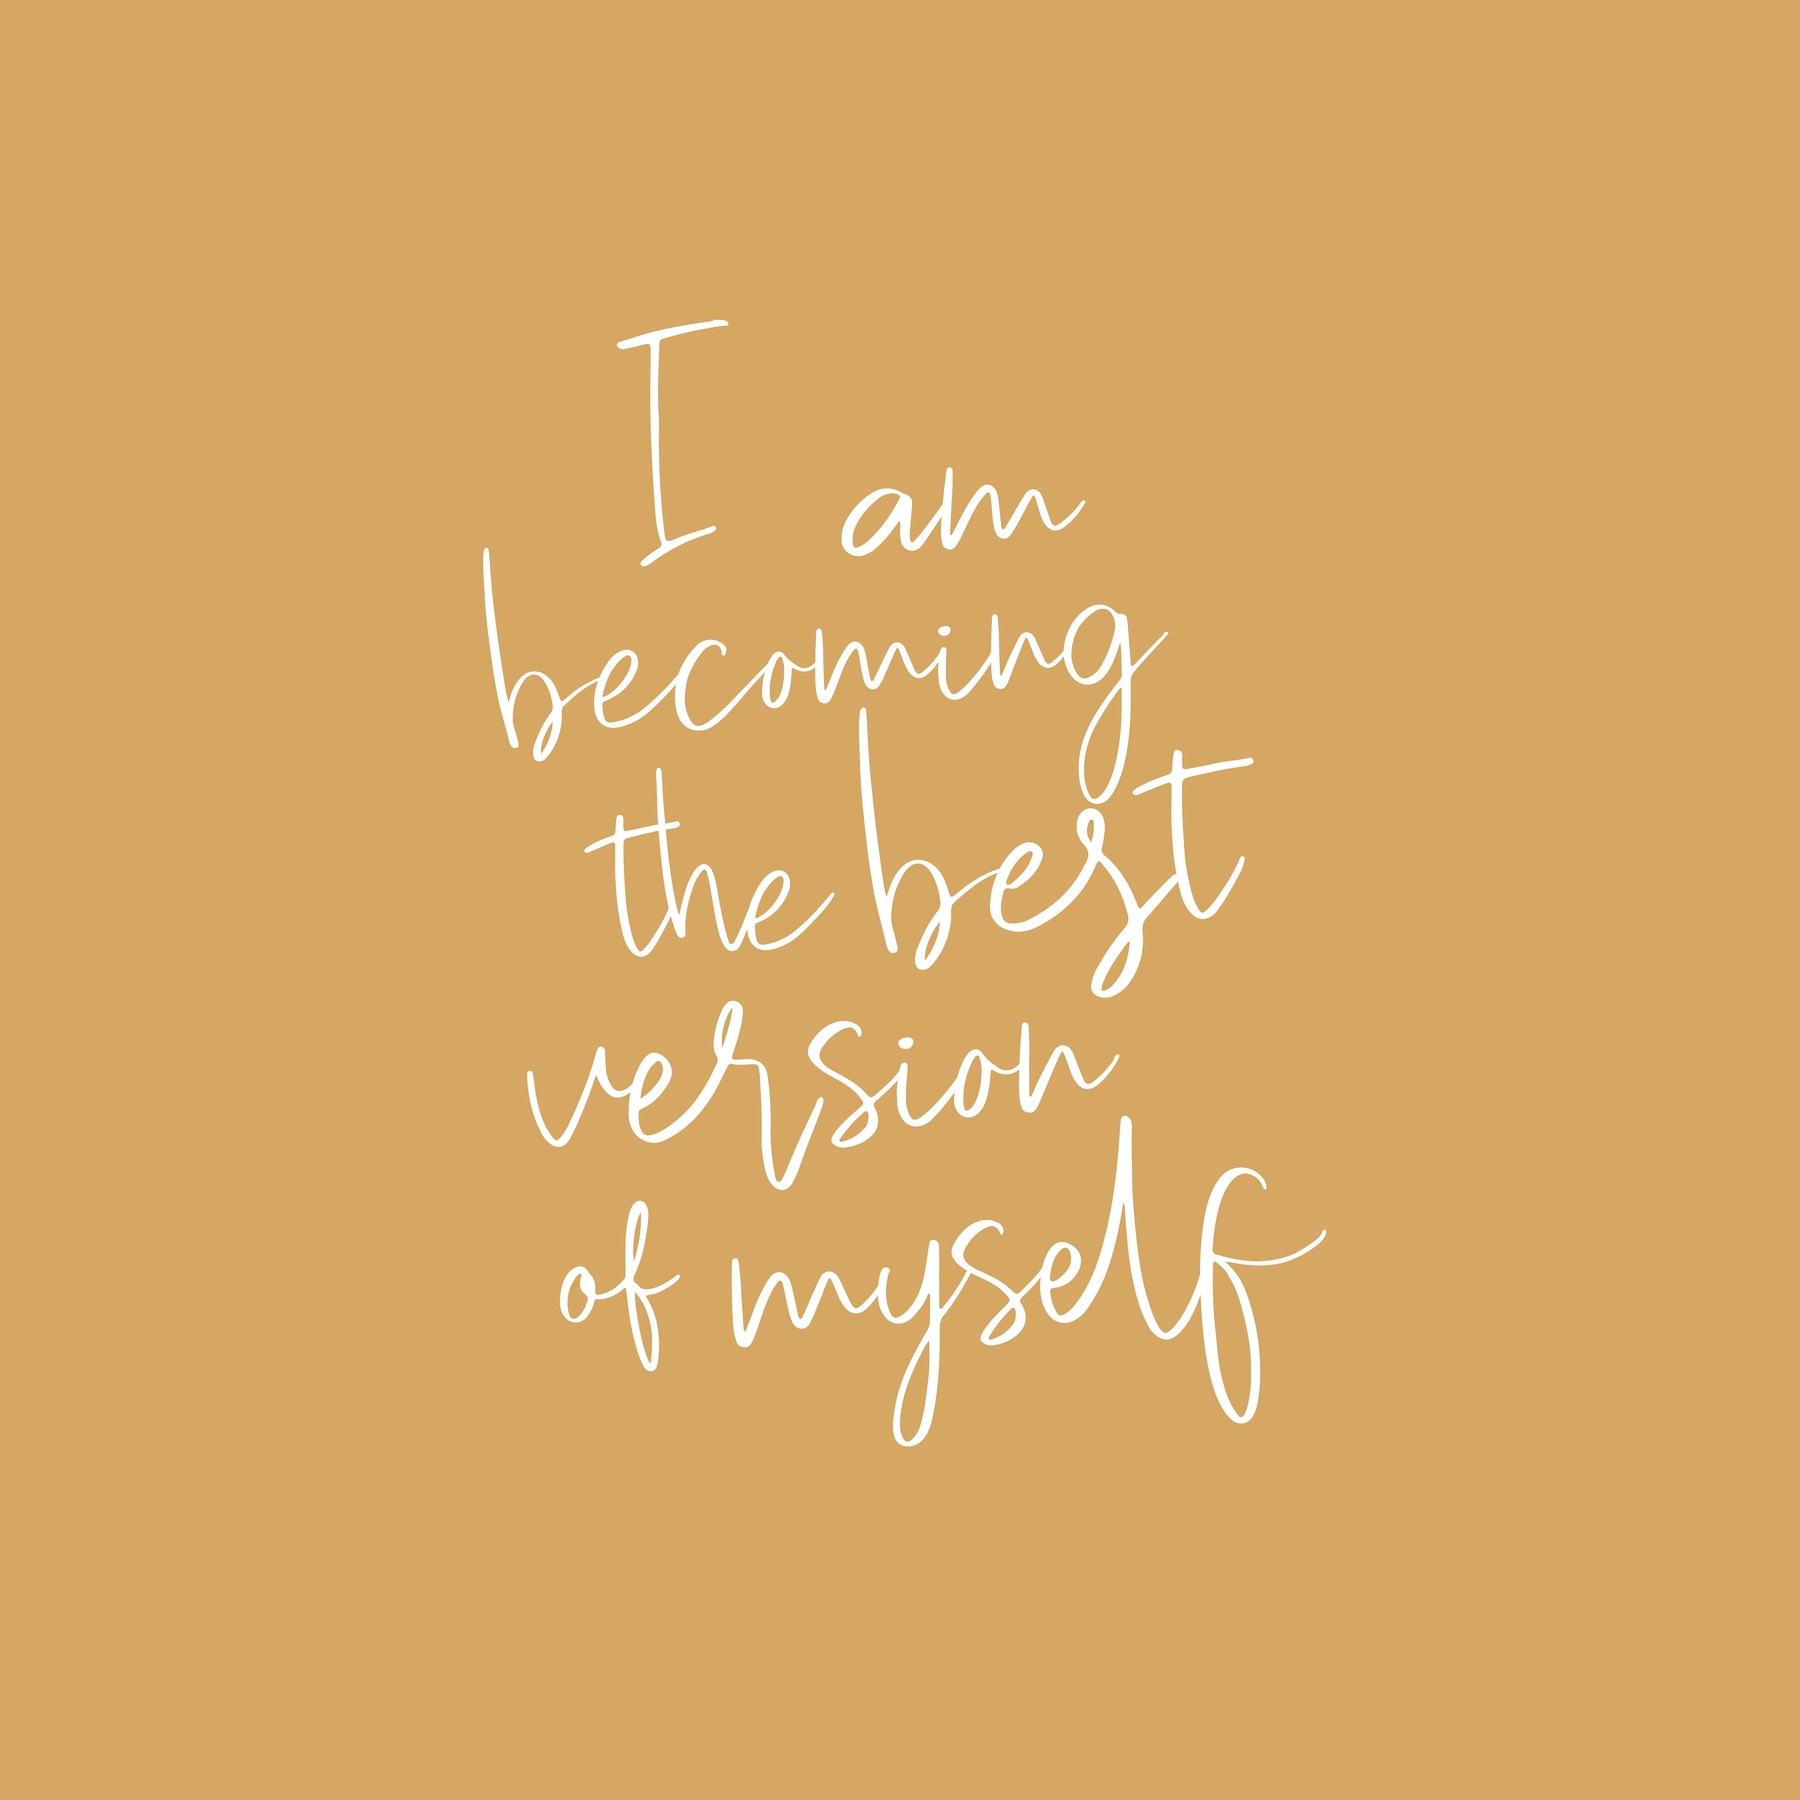 I Becoming Best Version Of Myself Wallpaper Happywall